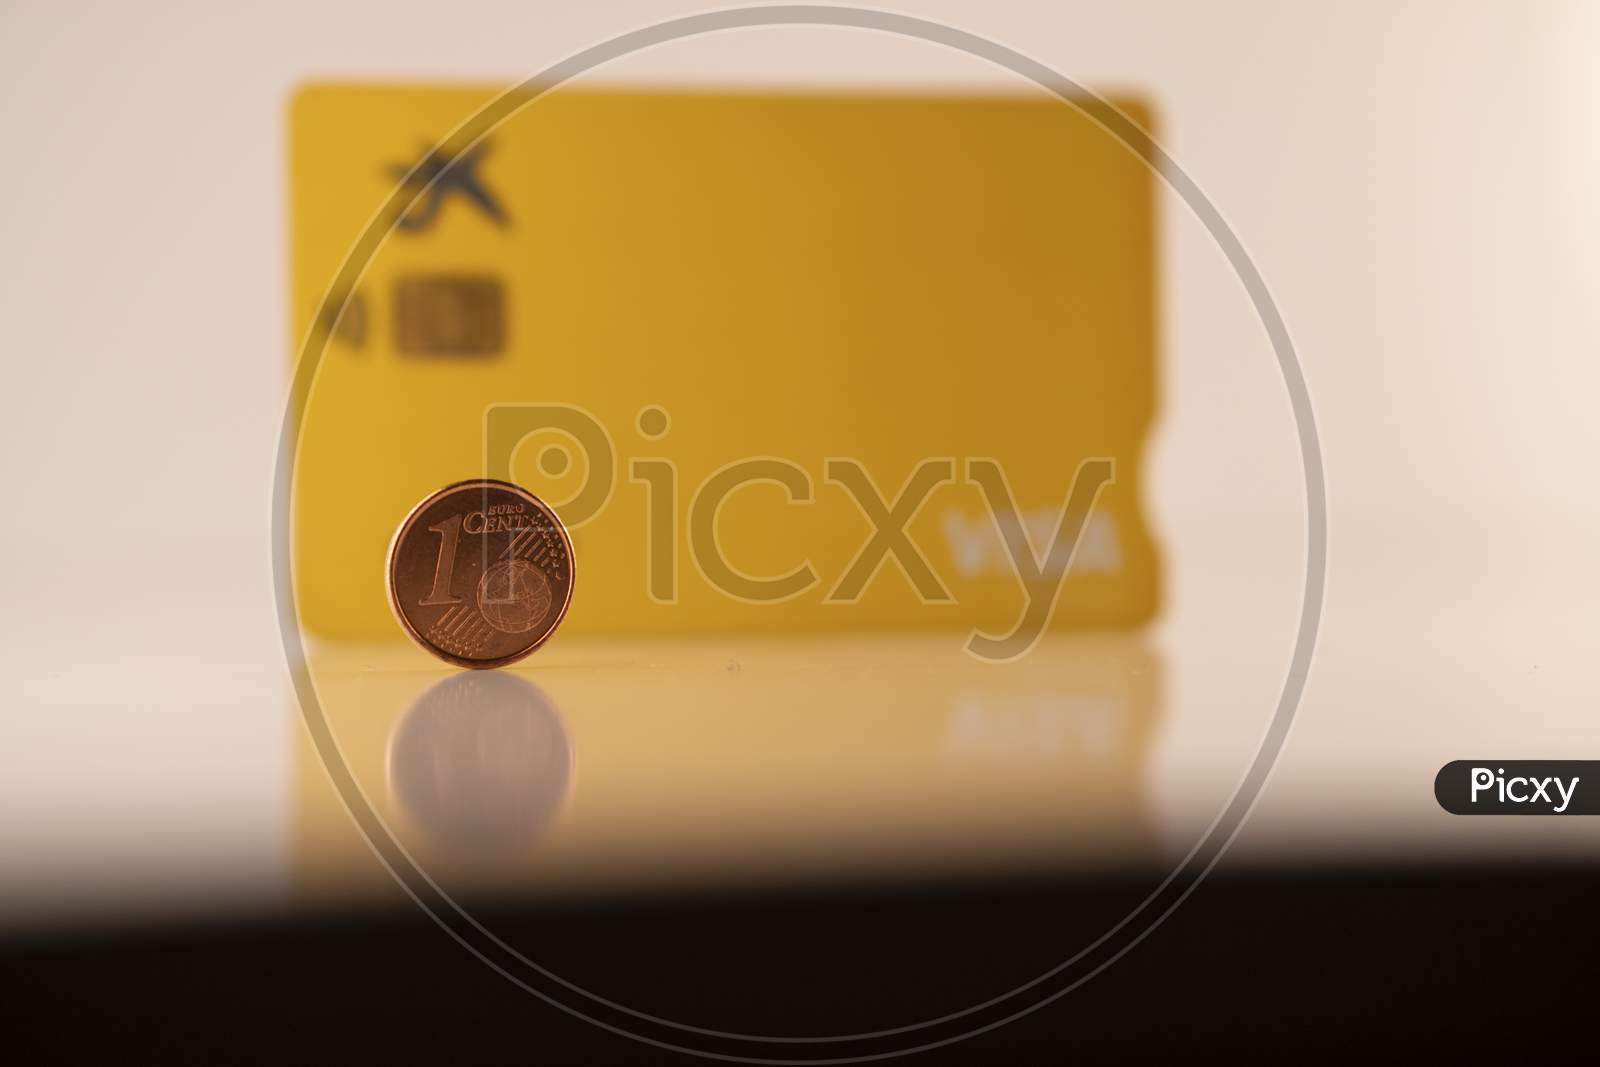 one euro coin and debit visa card against a white background.